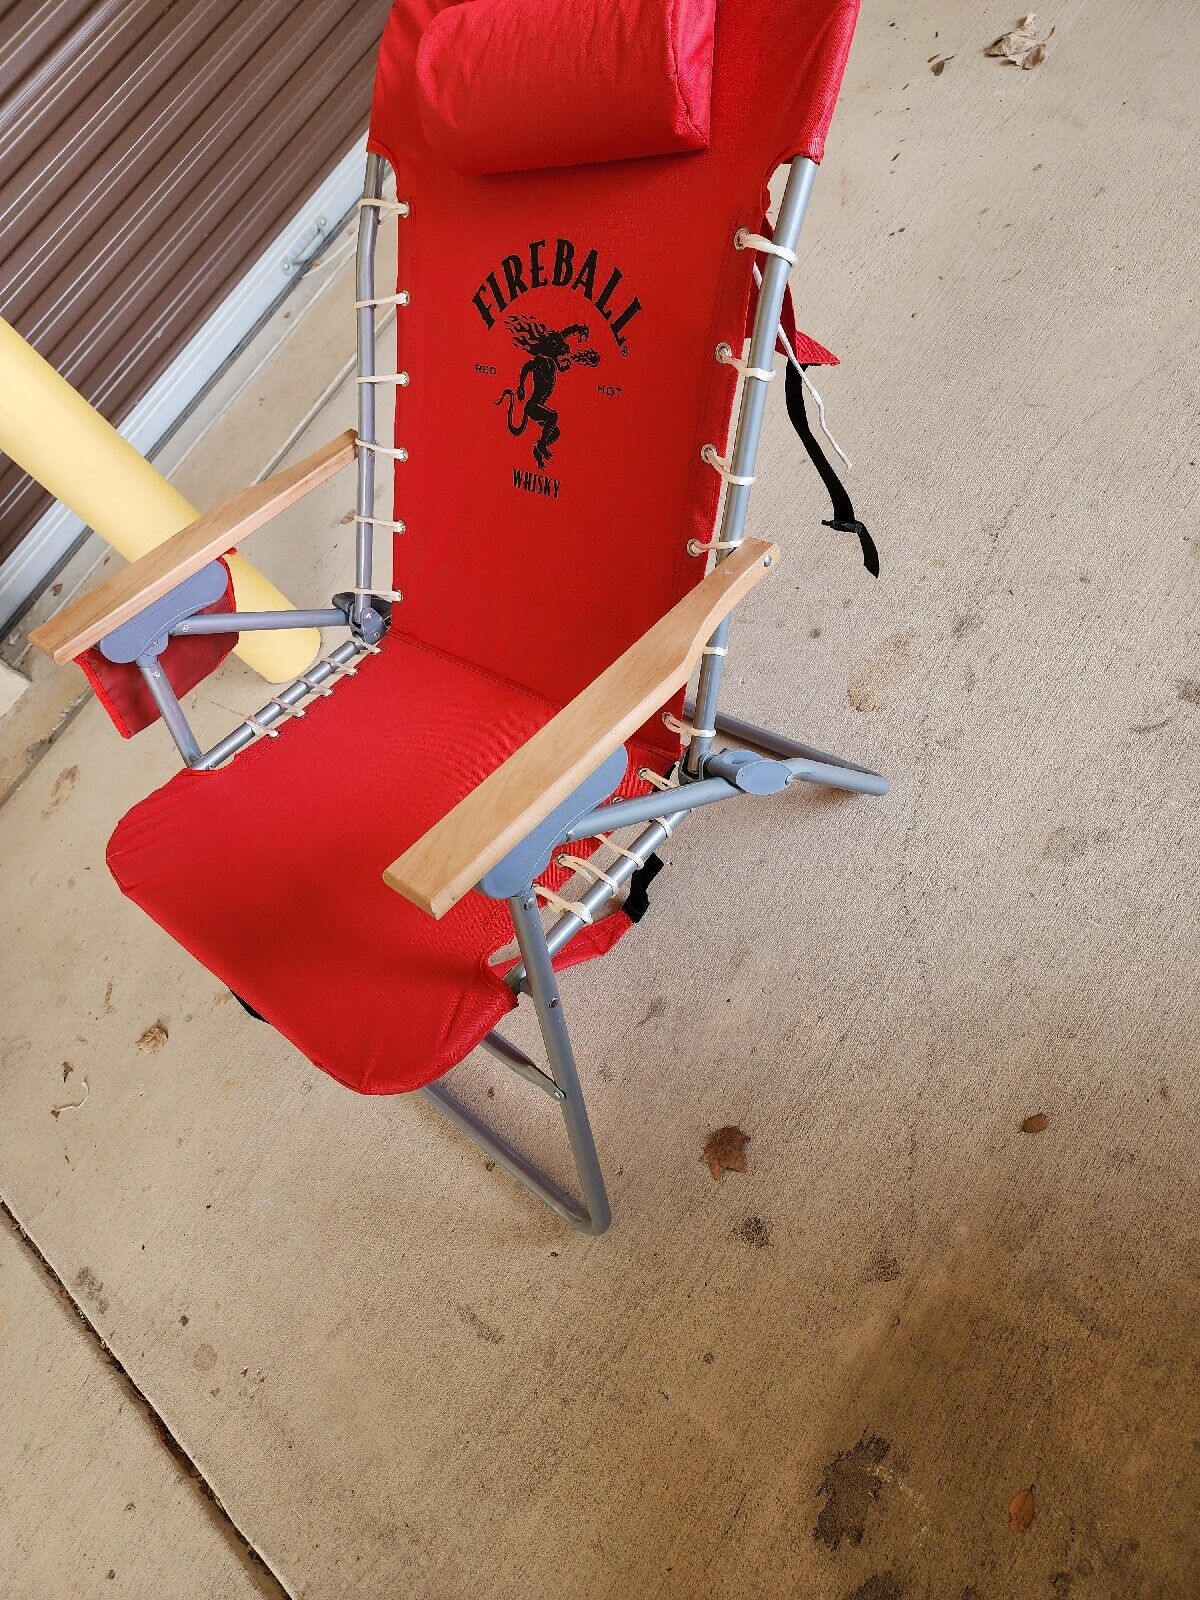 NEW Fireball Whiskey Foldable Lawn Chair w/ Wood Arm Rests Tailgate Chair Beer